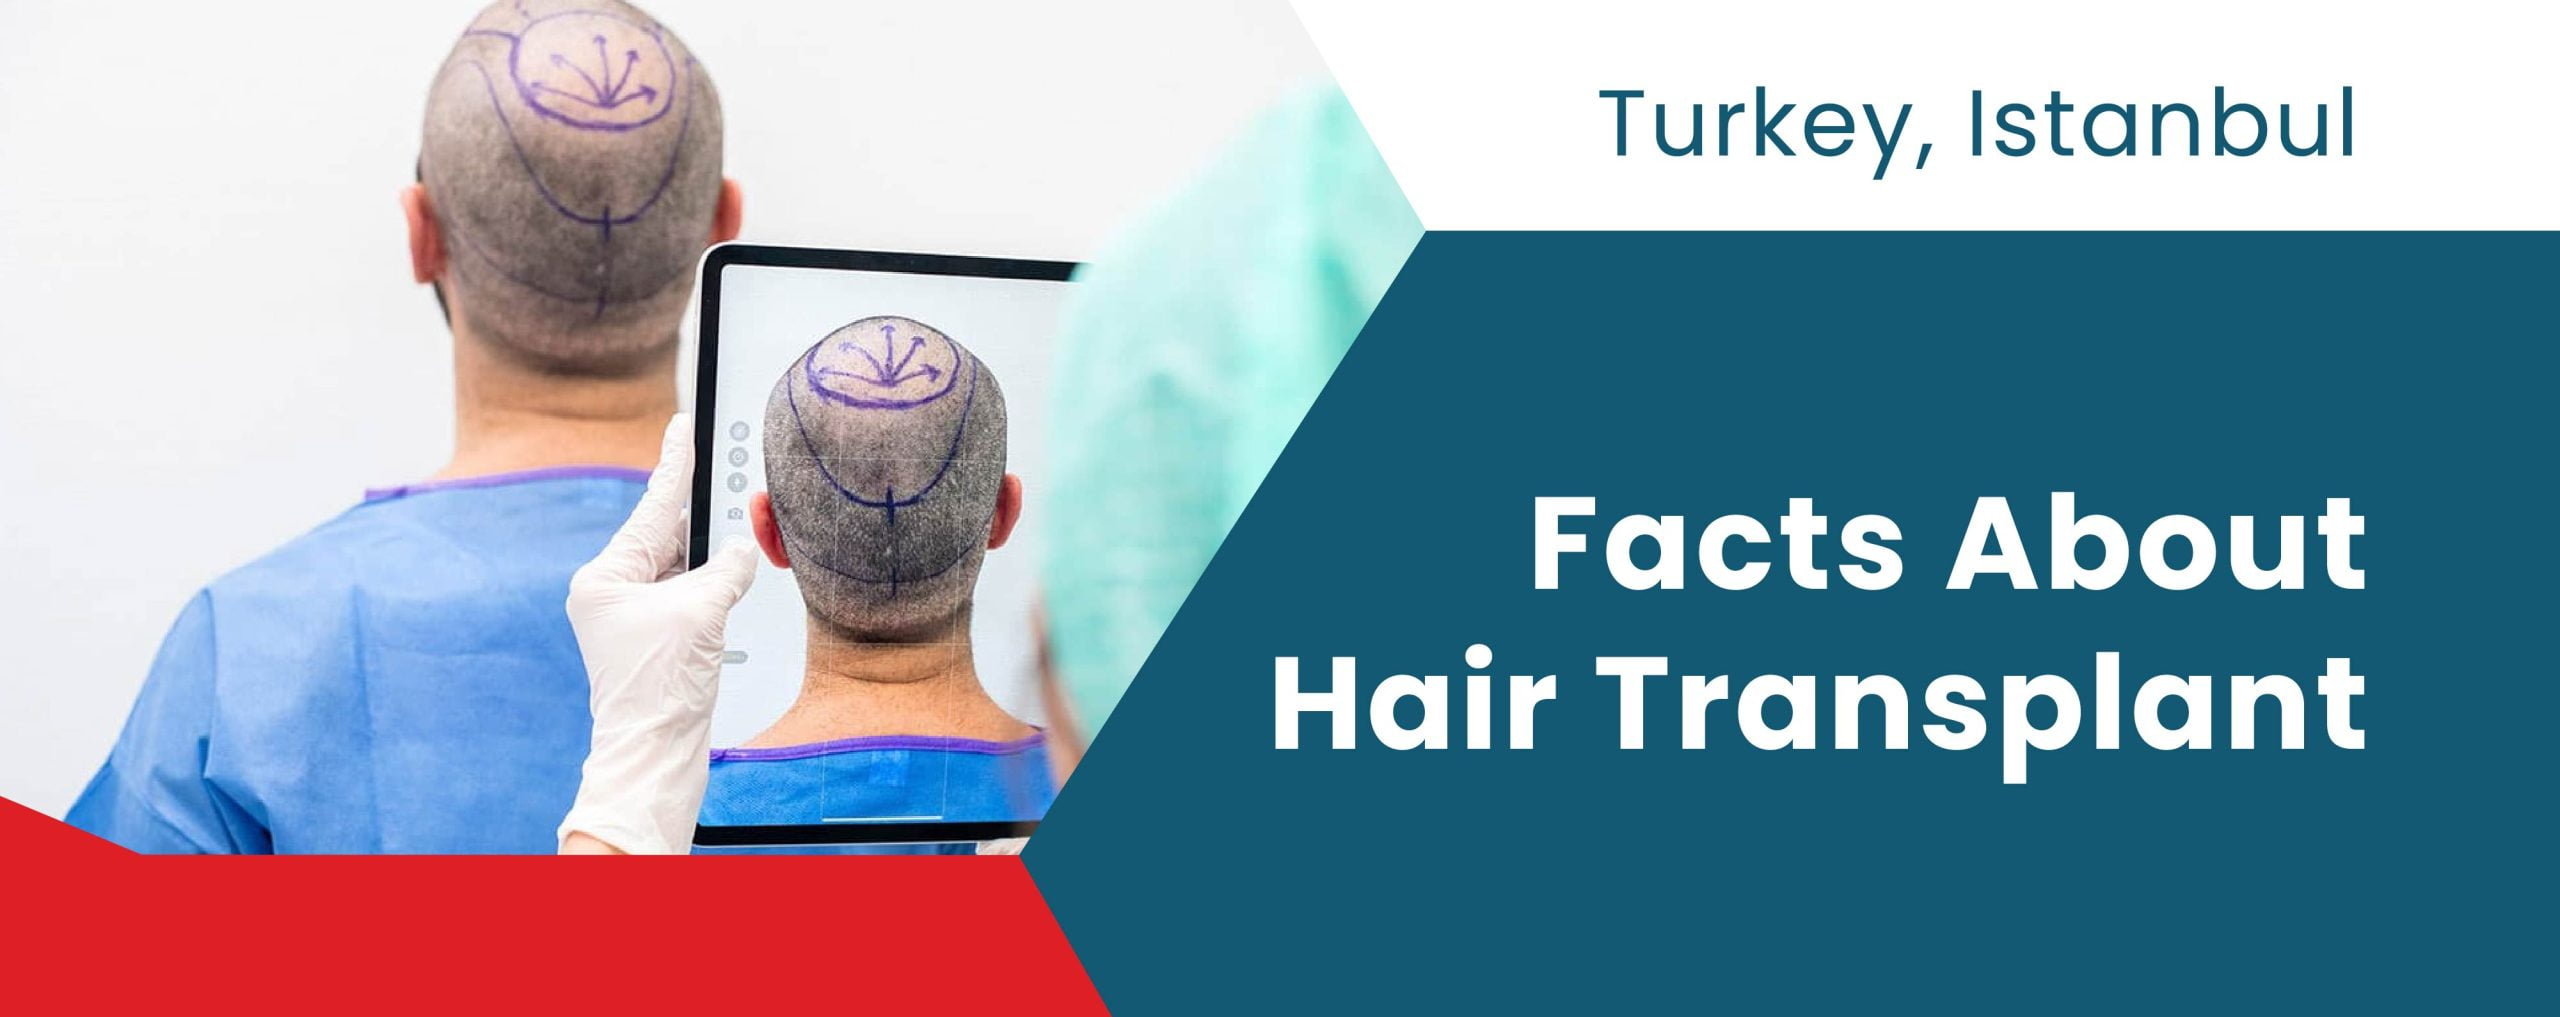 Facts About Hair Transplant